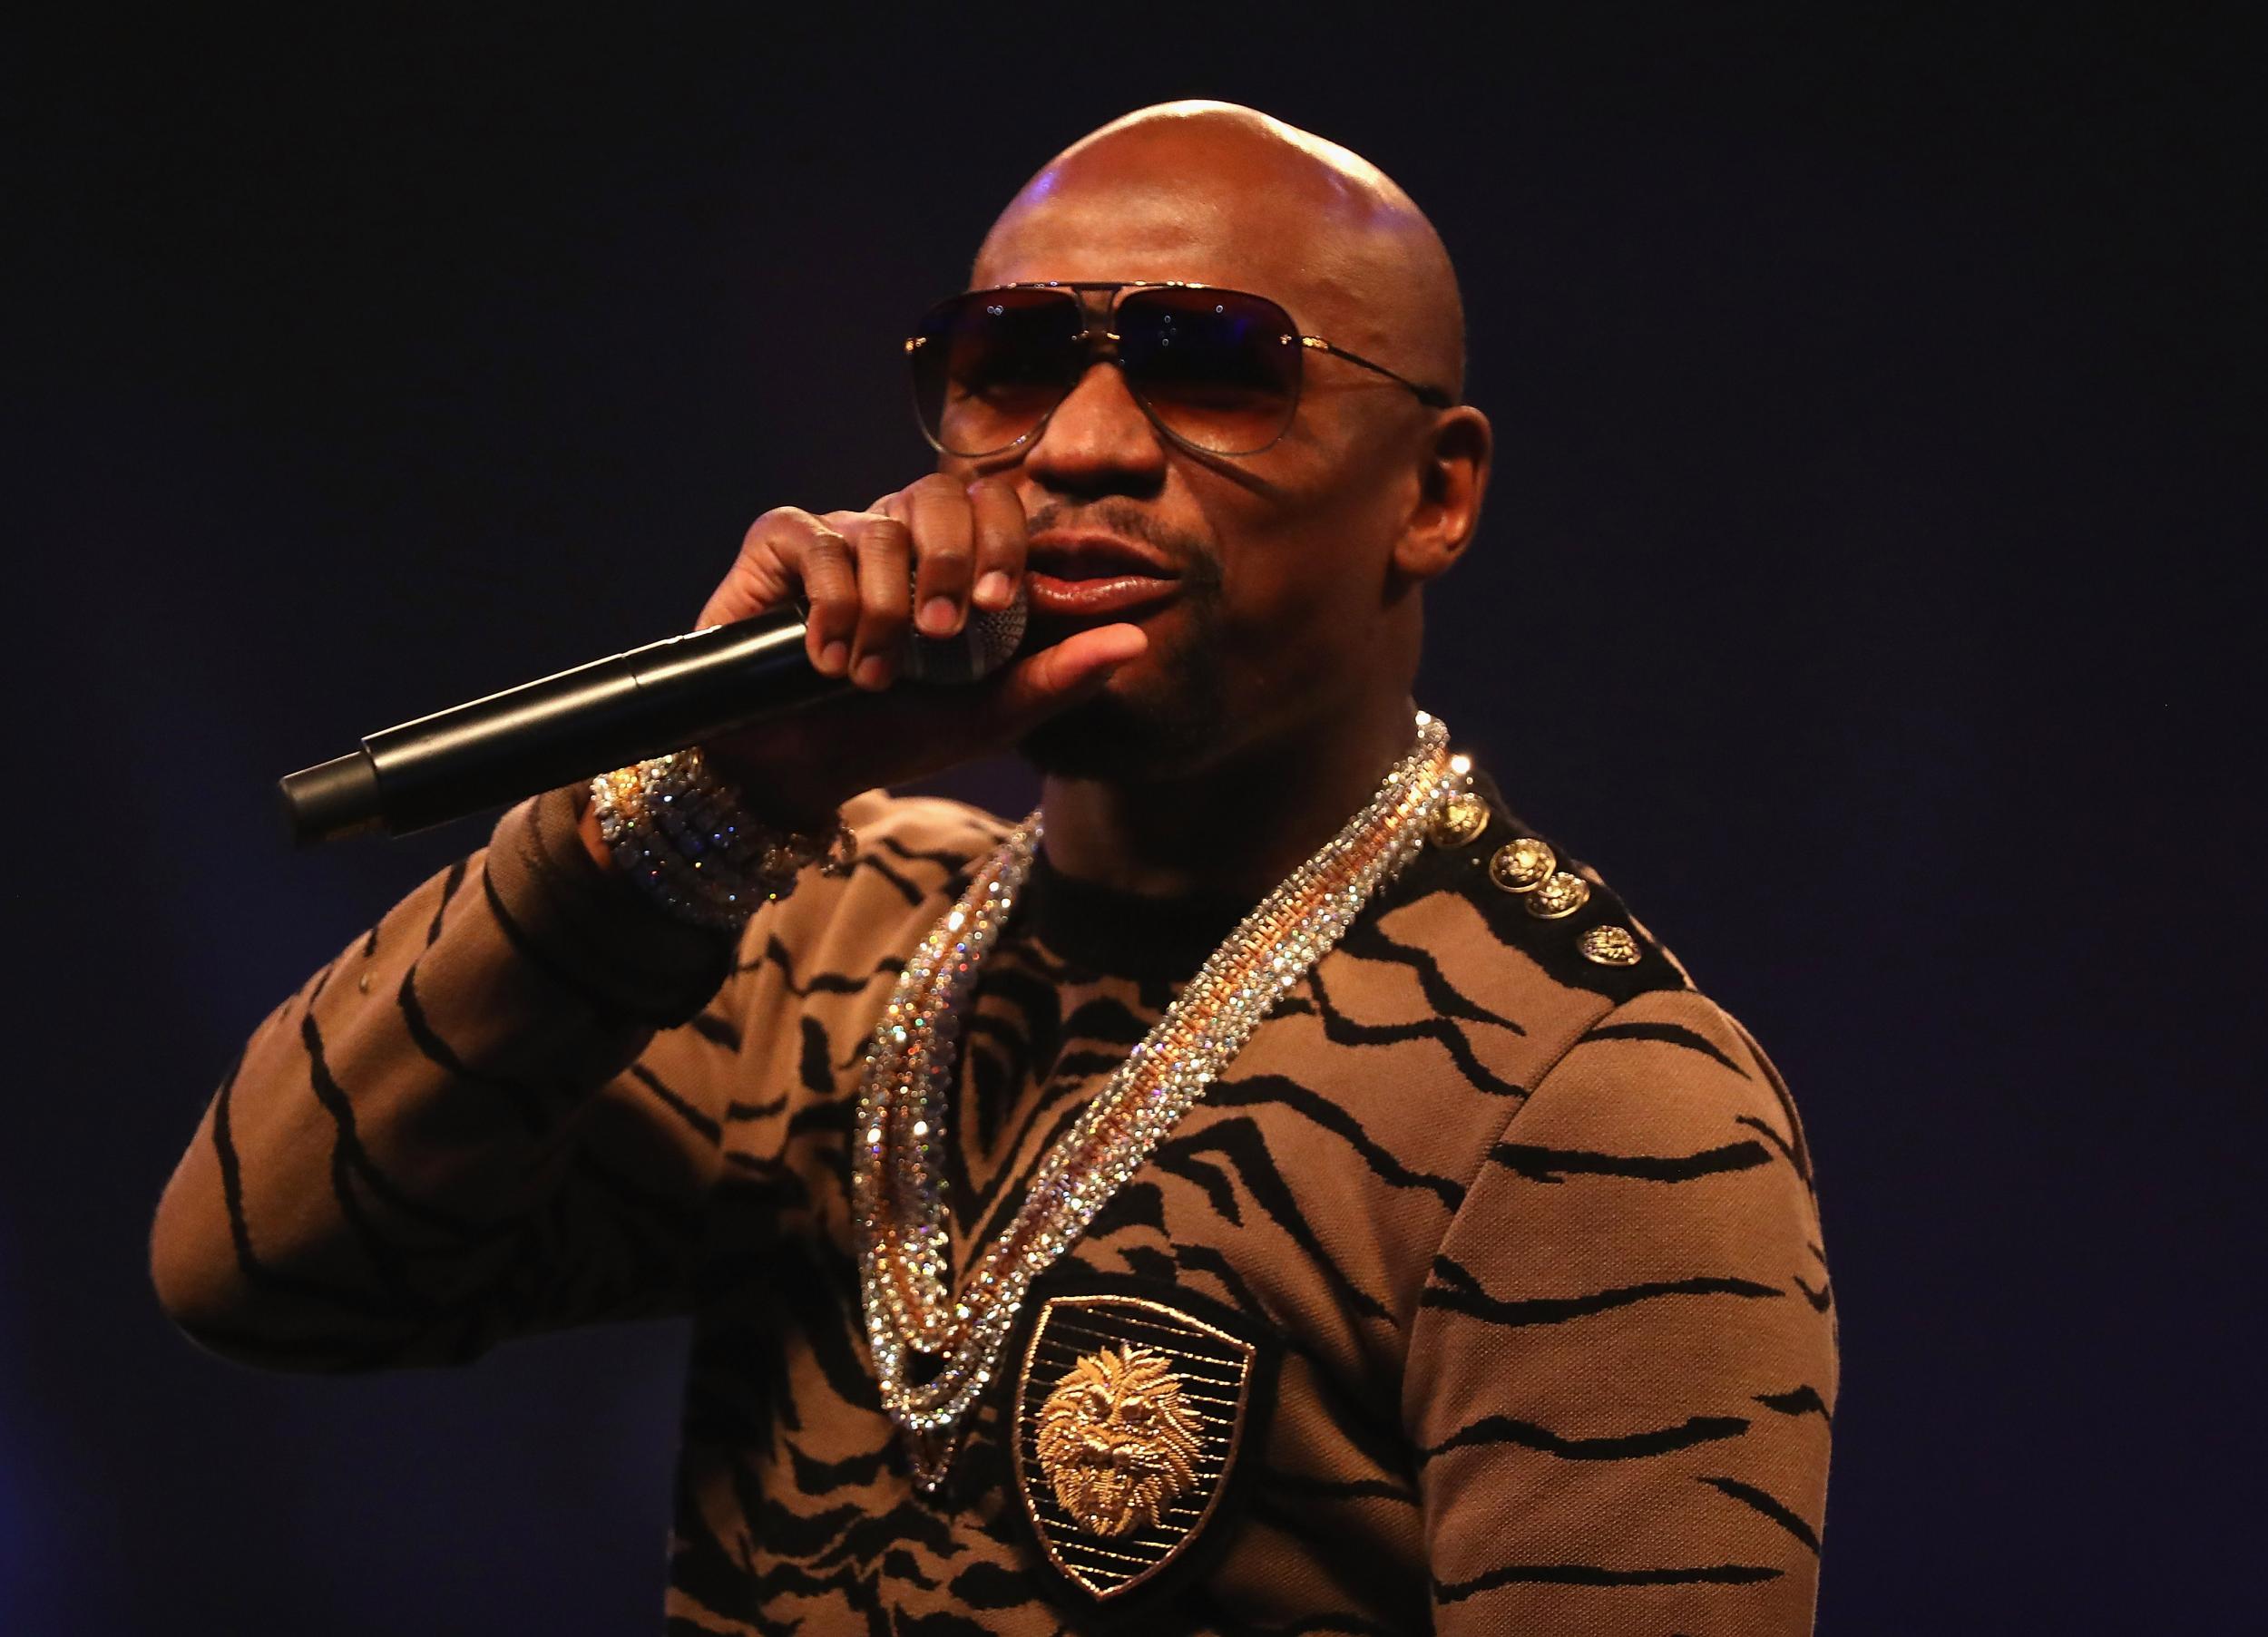 Mayweather?was loudly booed in London